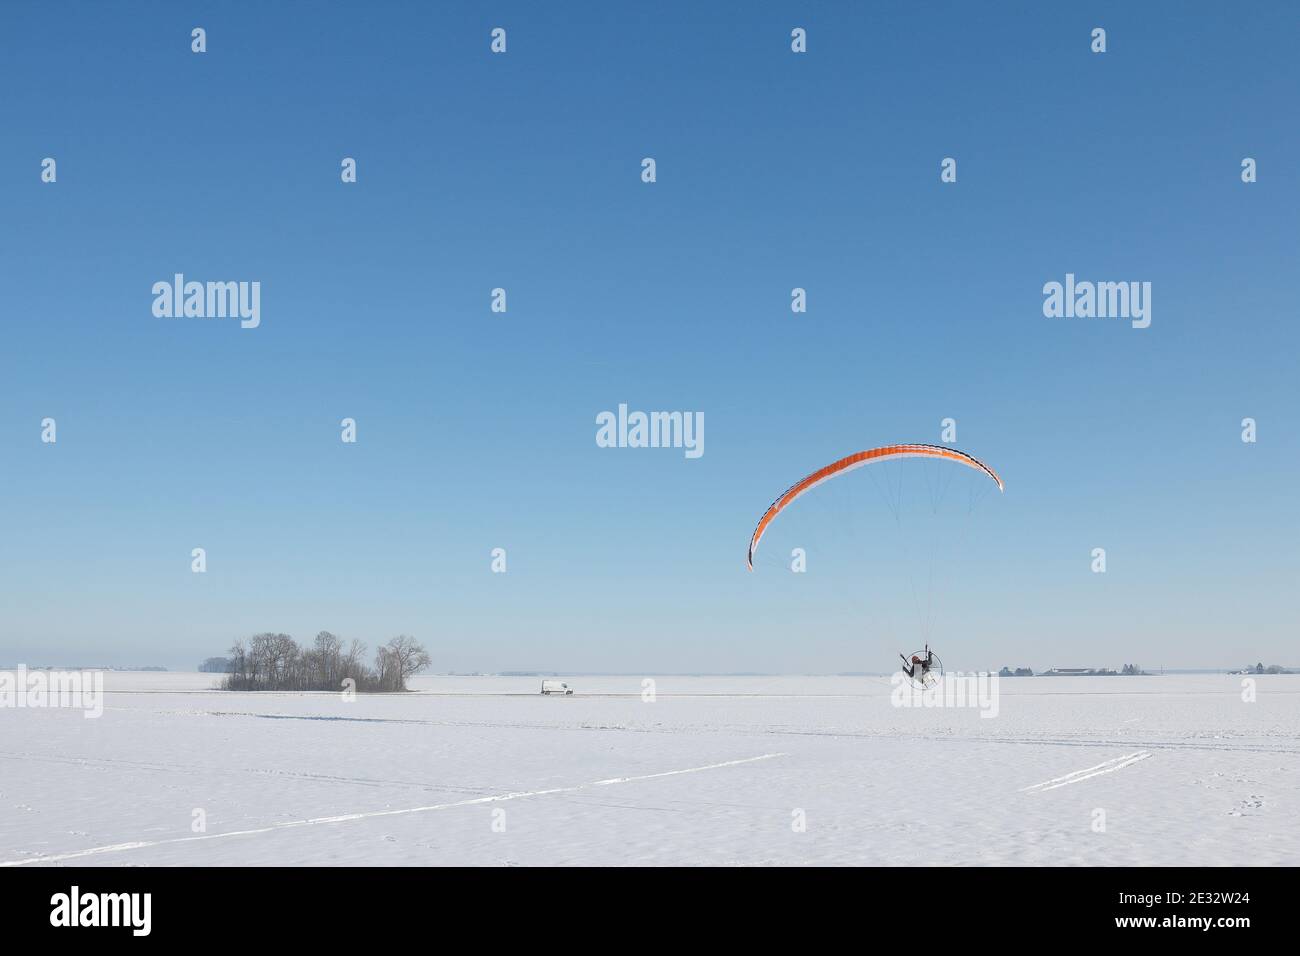 Orange motorized paraglider flying in a snowy field in winter with horizon and blue sky Stock Photo